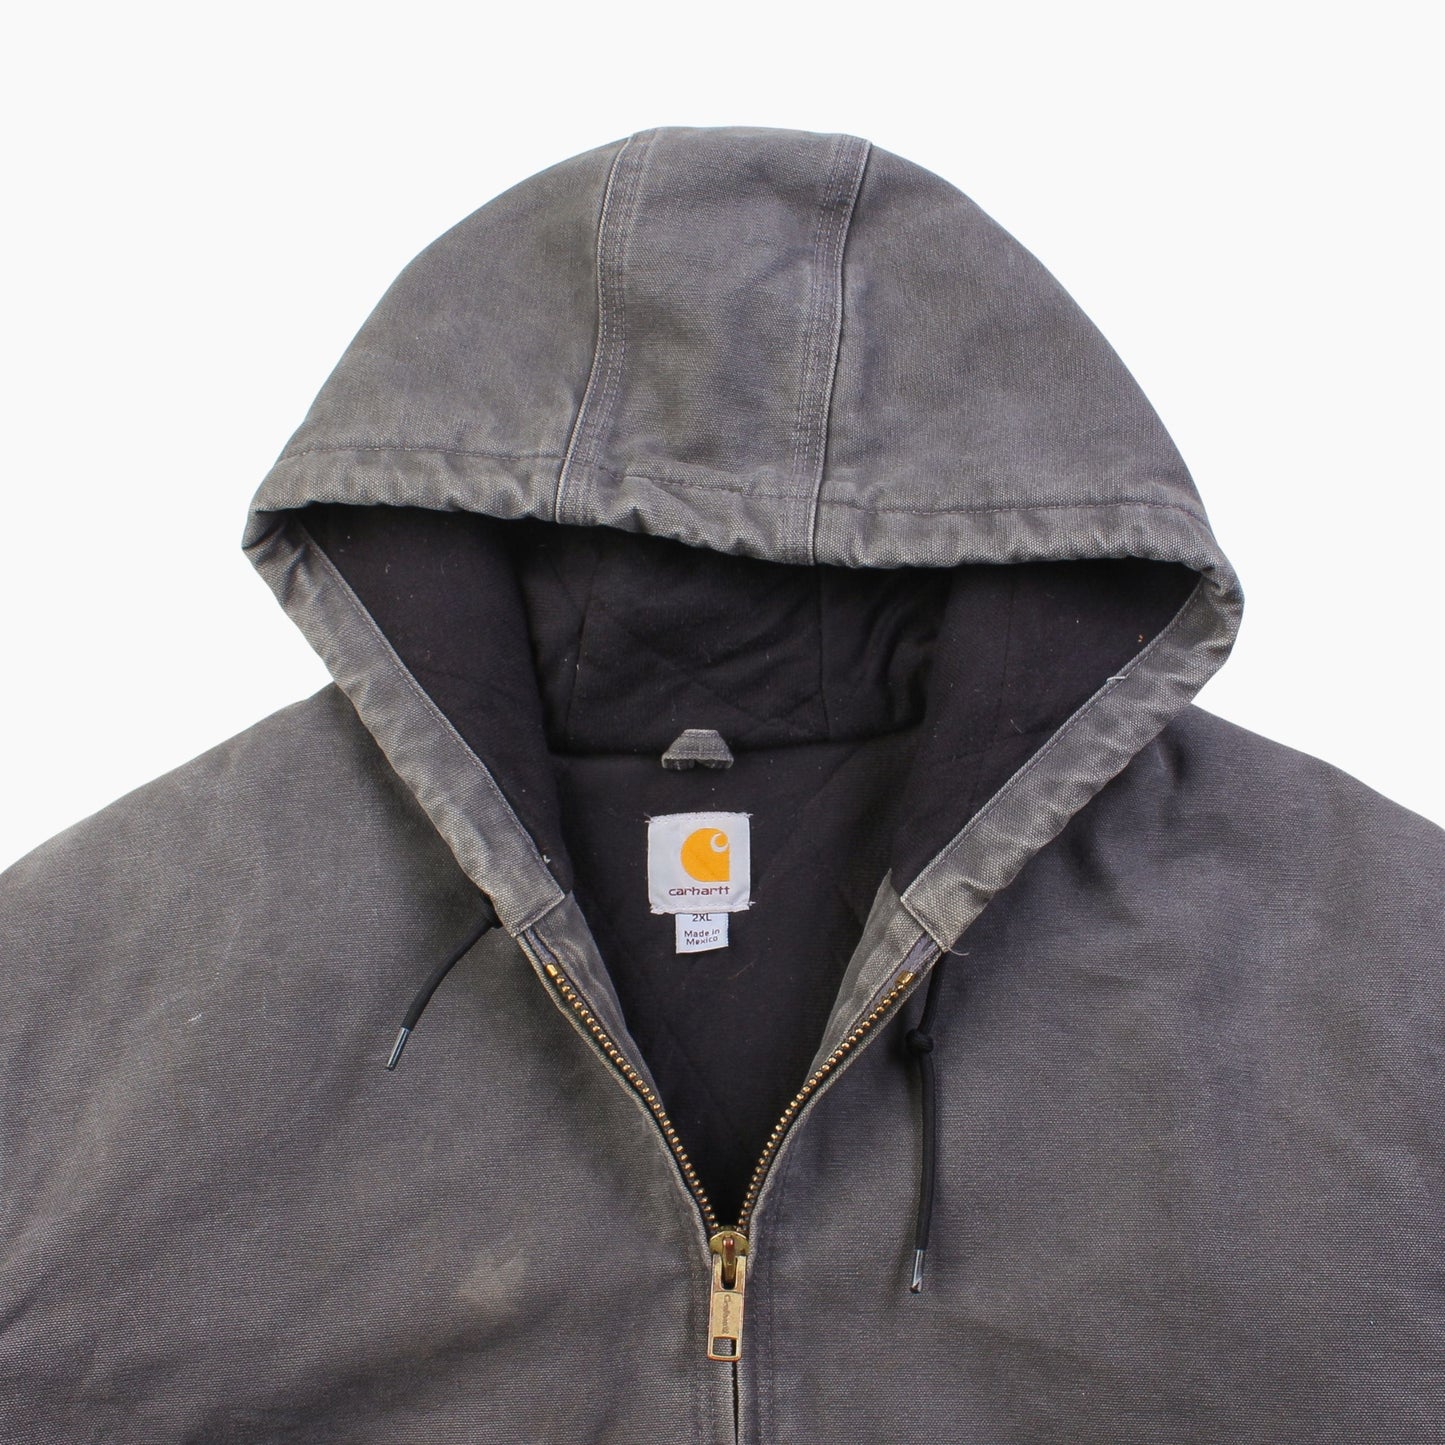 Active Hooded Jacket - Washed Charcoal - American Madness